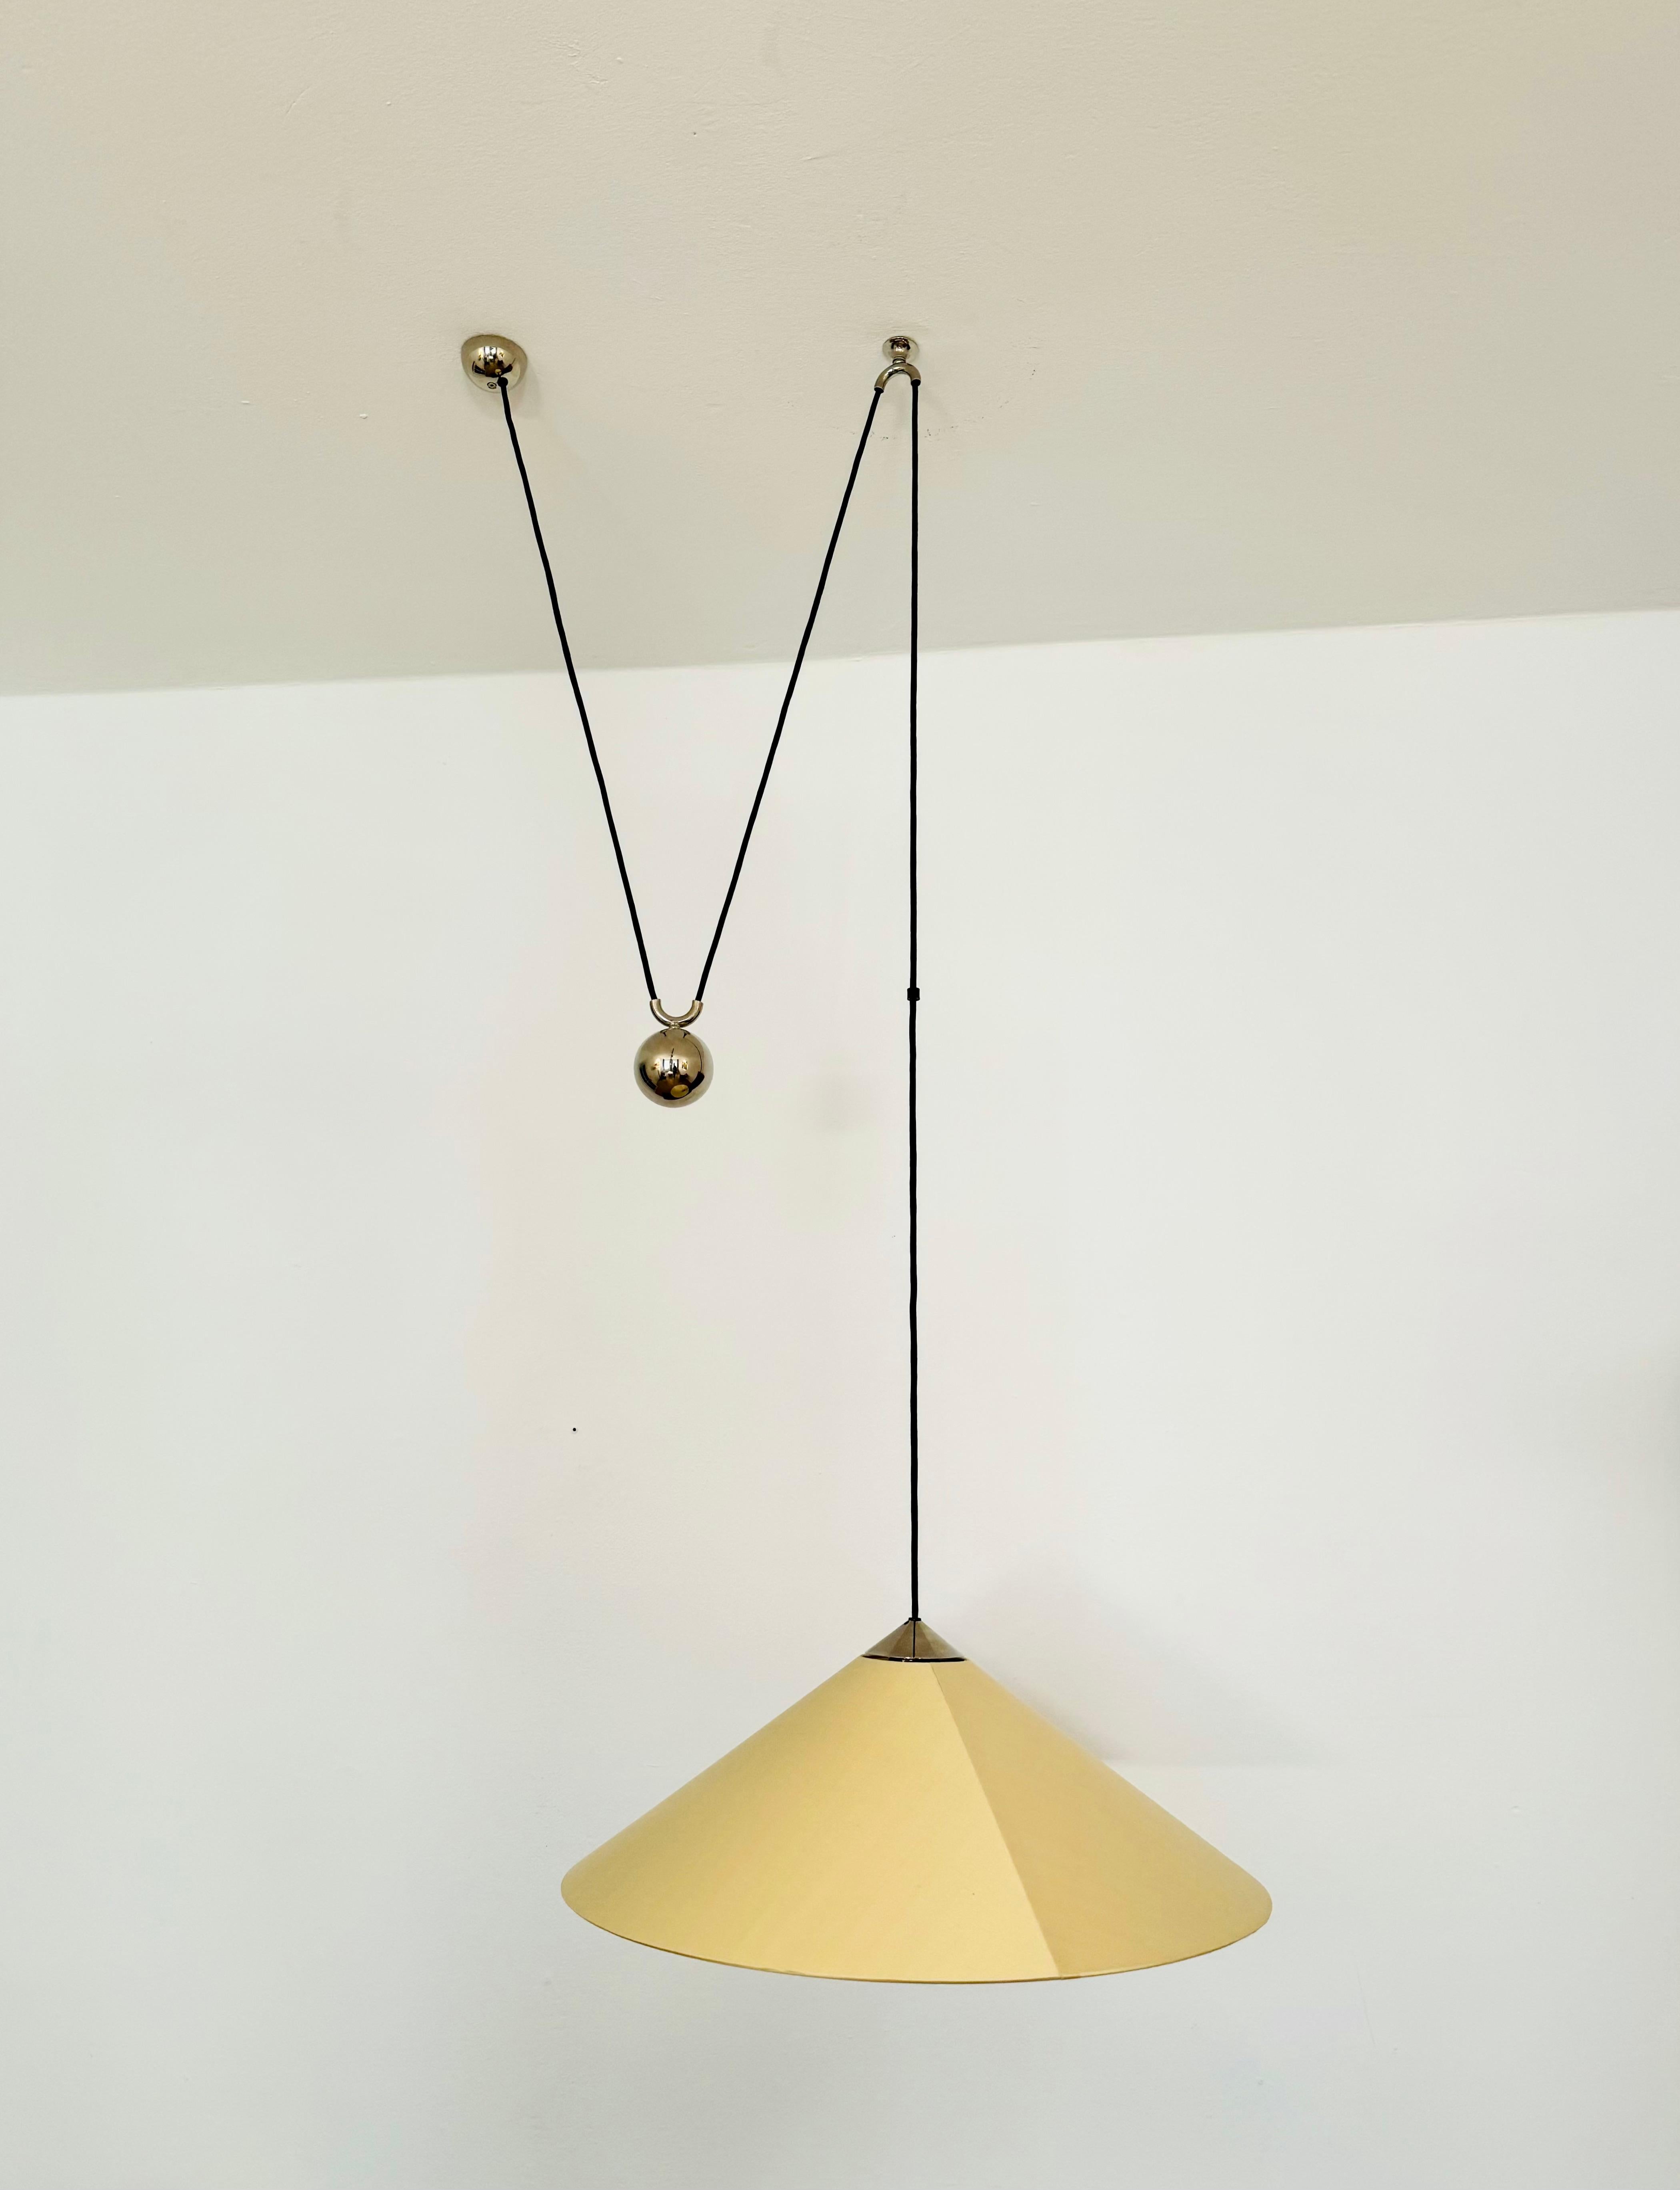 Mid-20th Century Large Adjustable Pendant Lamp with Counterweight by Florian Schulz For Sale